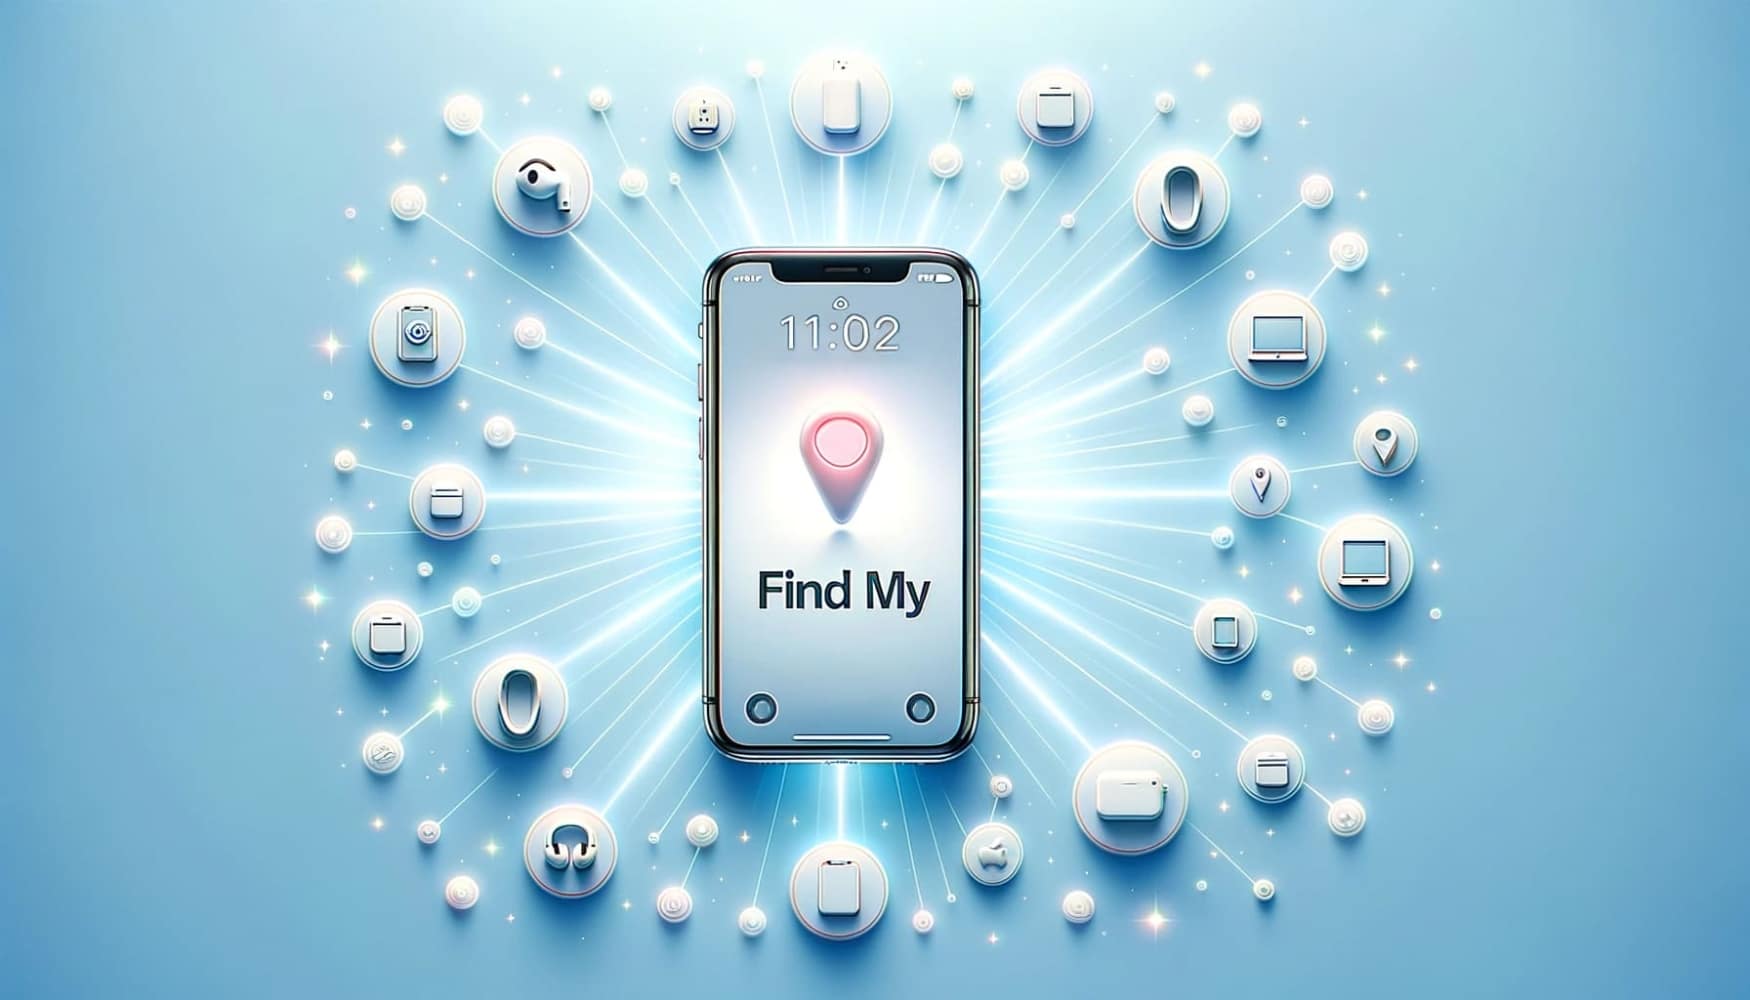 An iPhone with the "Find My" interface connected by radiant rays to icons of other Apple devices on a light blue background